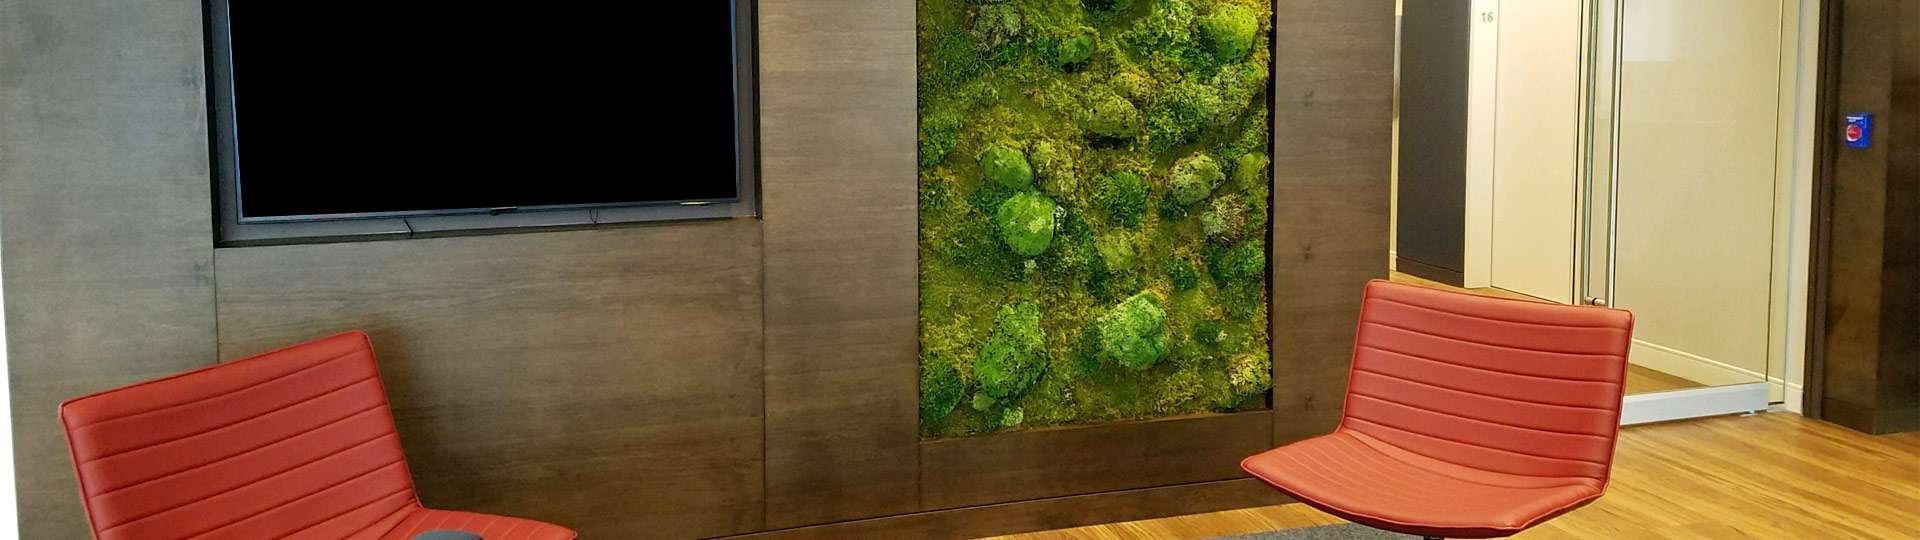 mcm chairs in lobby with a moss wall